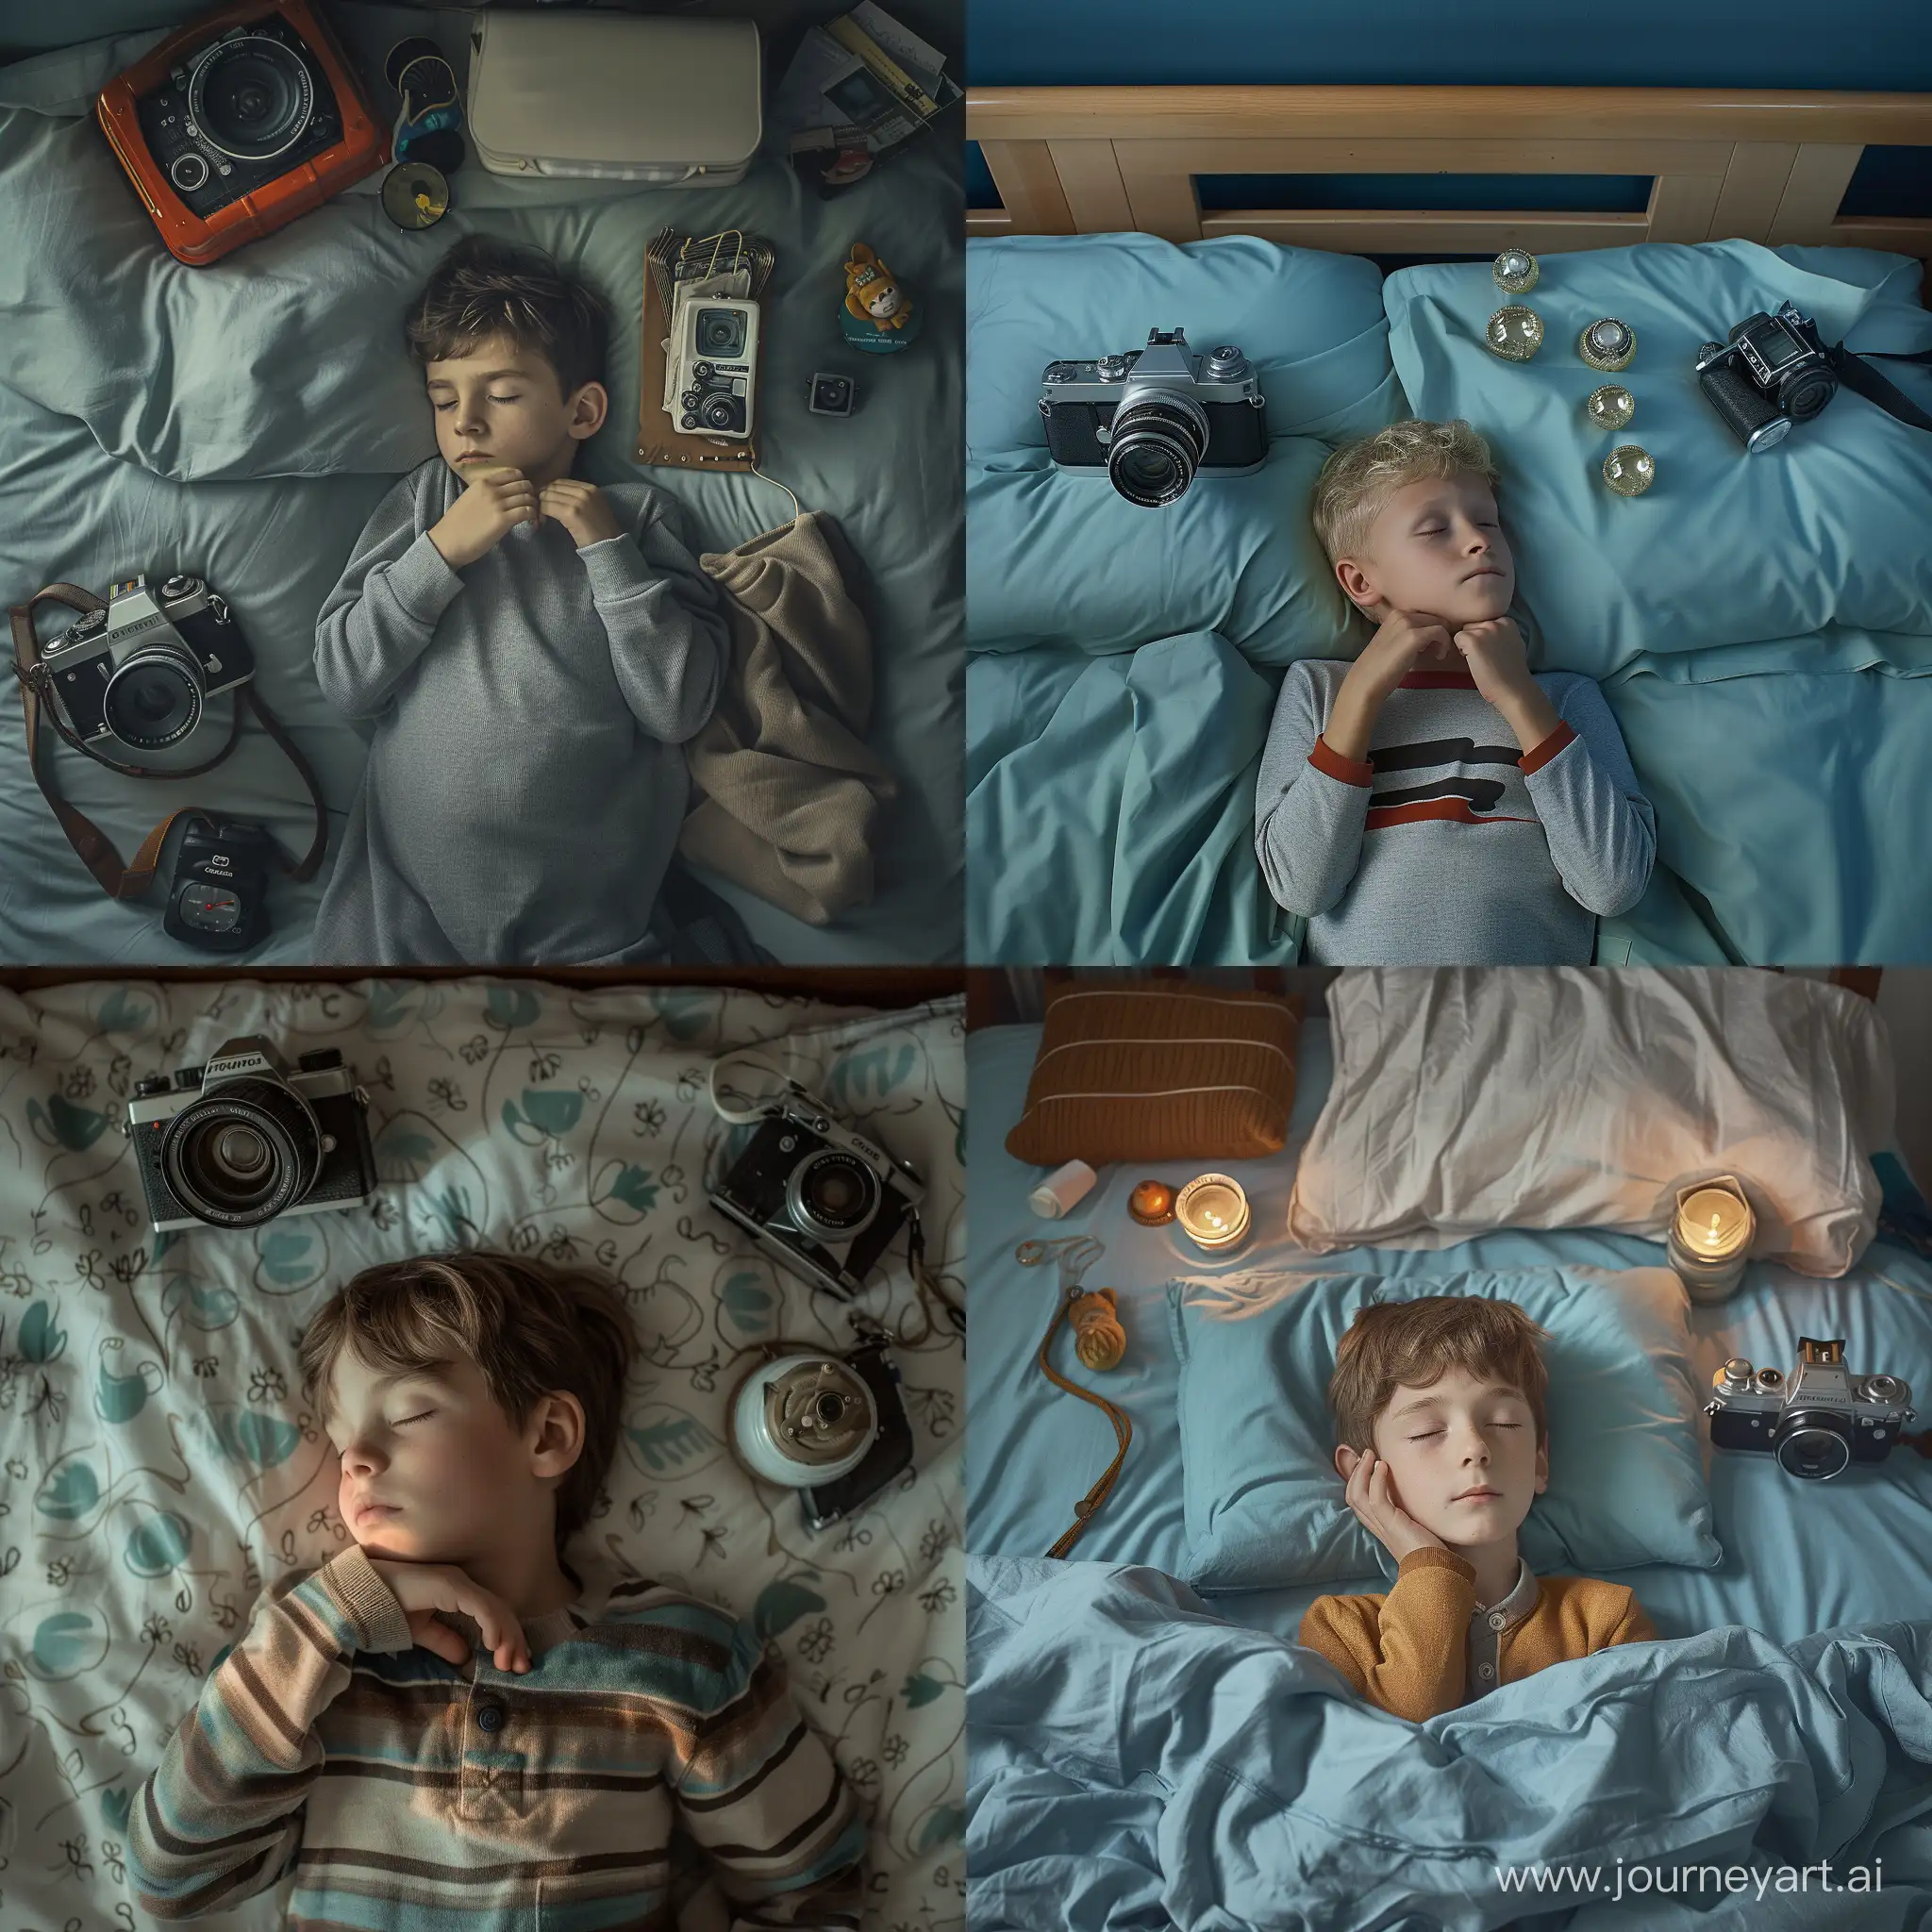 Contemplative-Boy-Sleeping-in-Bed-with-Dreaming-Thoughts